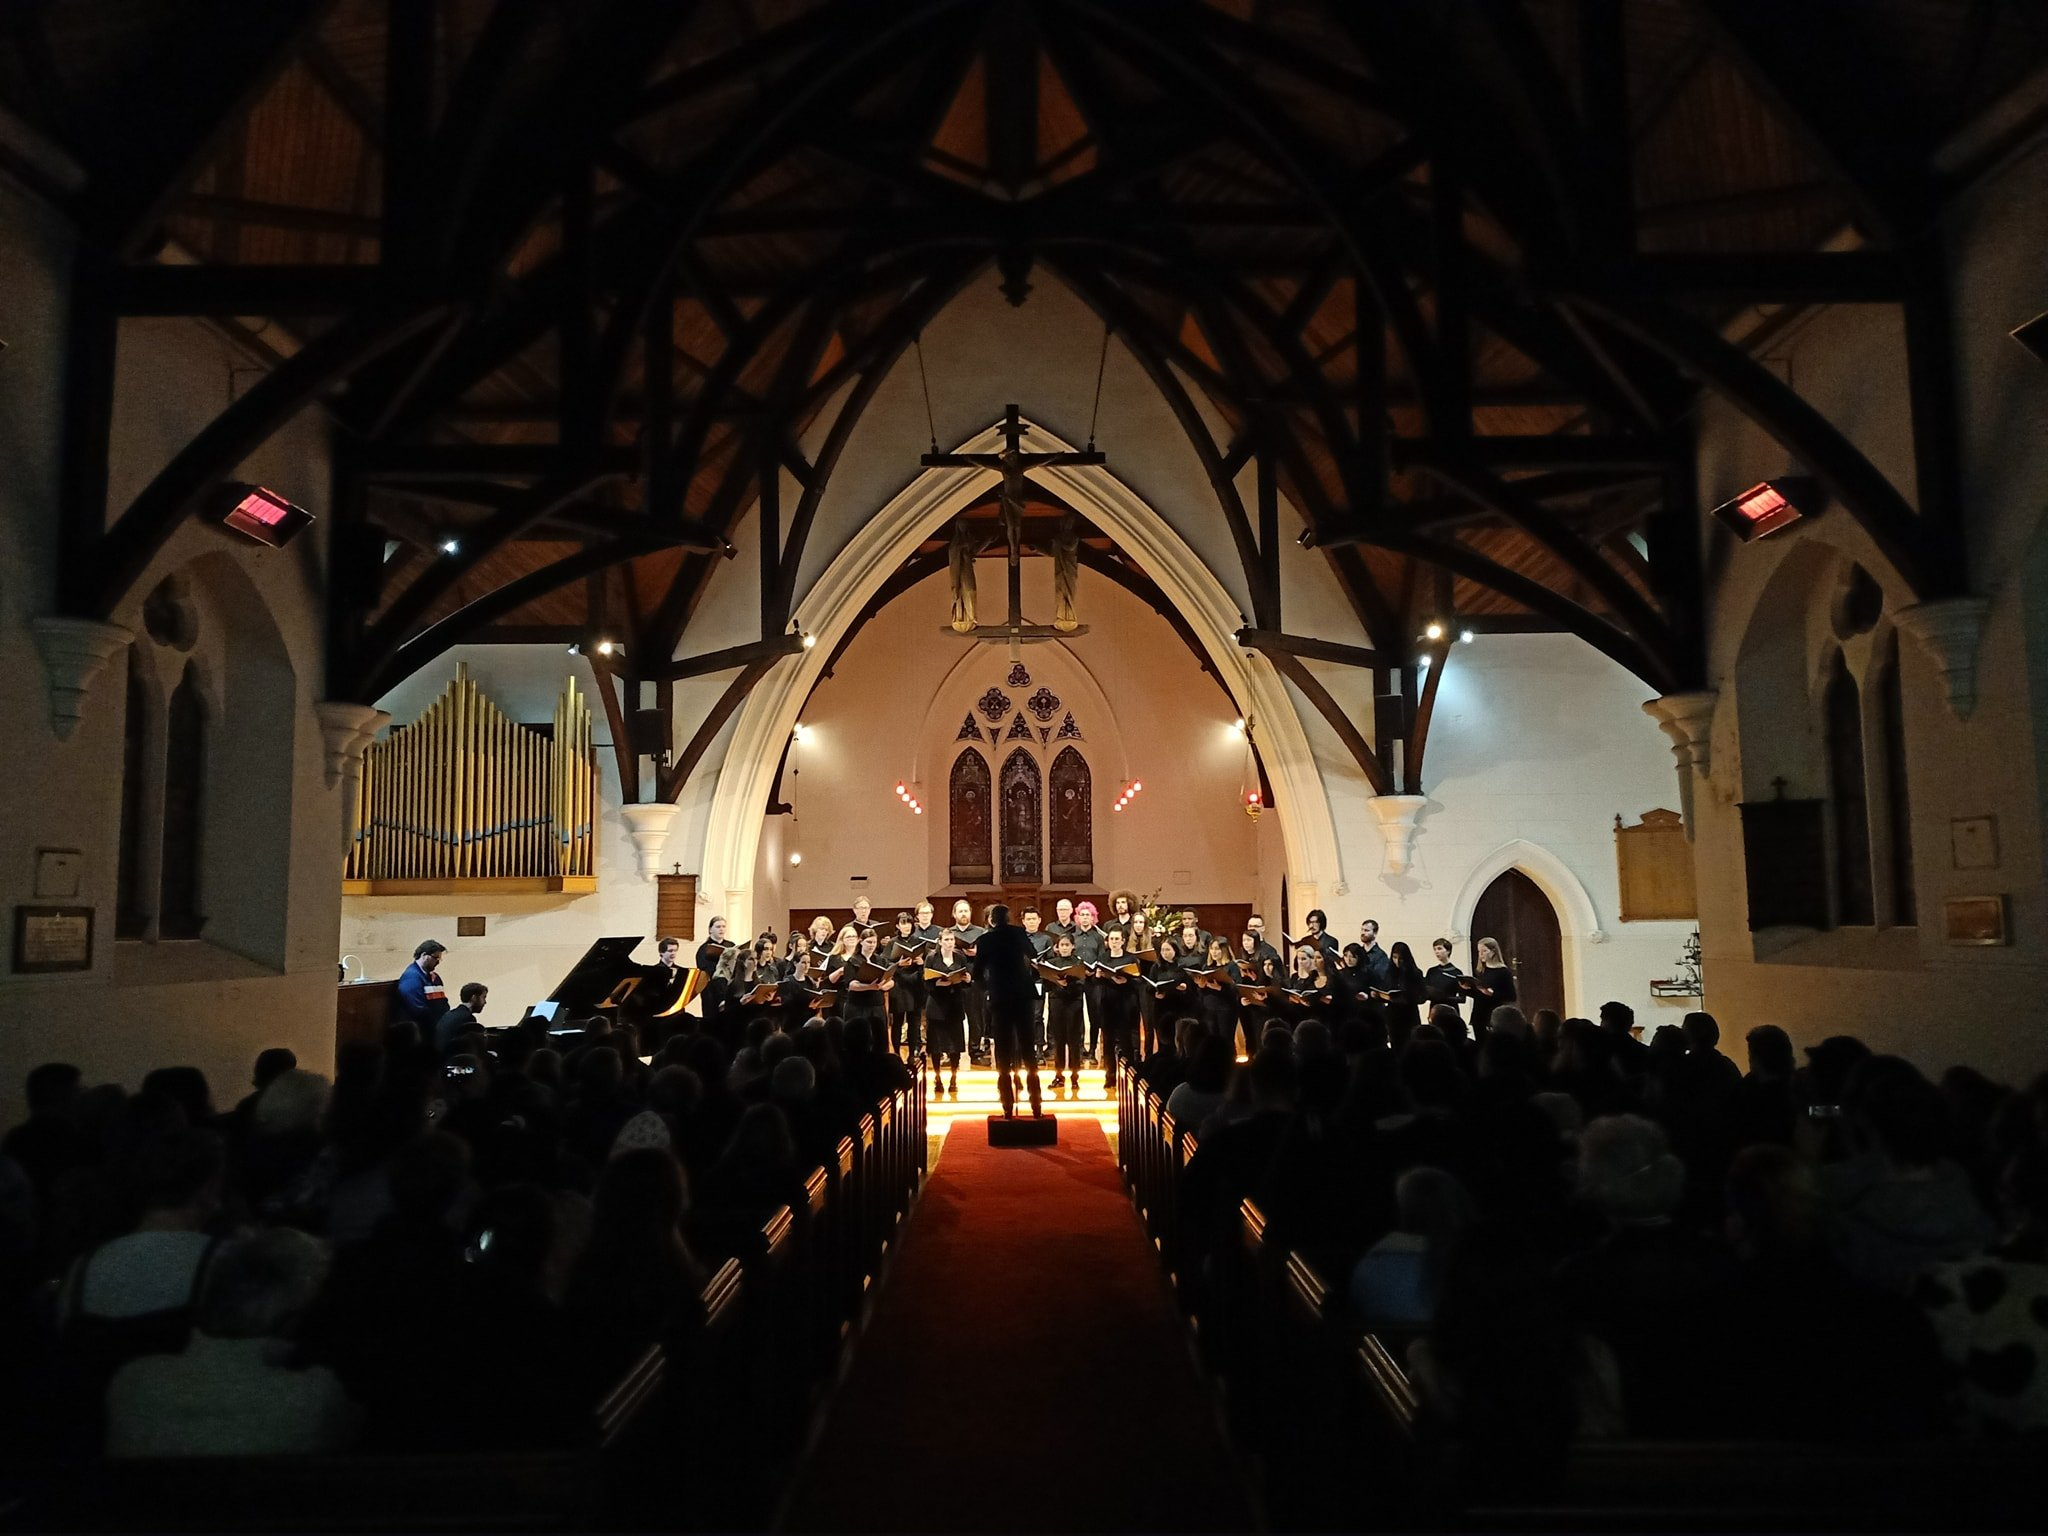 A picture of the packed insides of St John's East Malvern as we were performing our concert! There are packed pews, an empty red-carpeted walkway in the middle, and the choir on stage lit up and holding our music folders as we stand and sing.